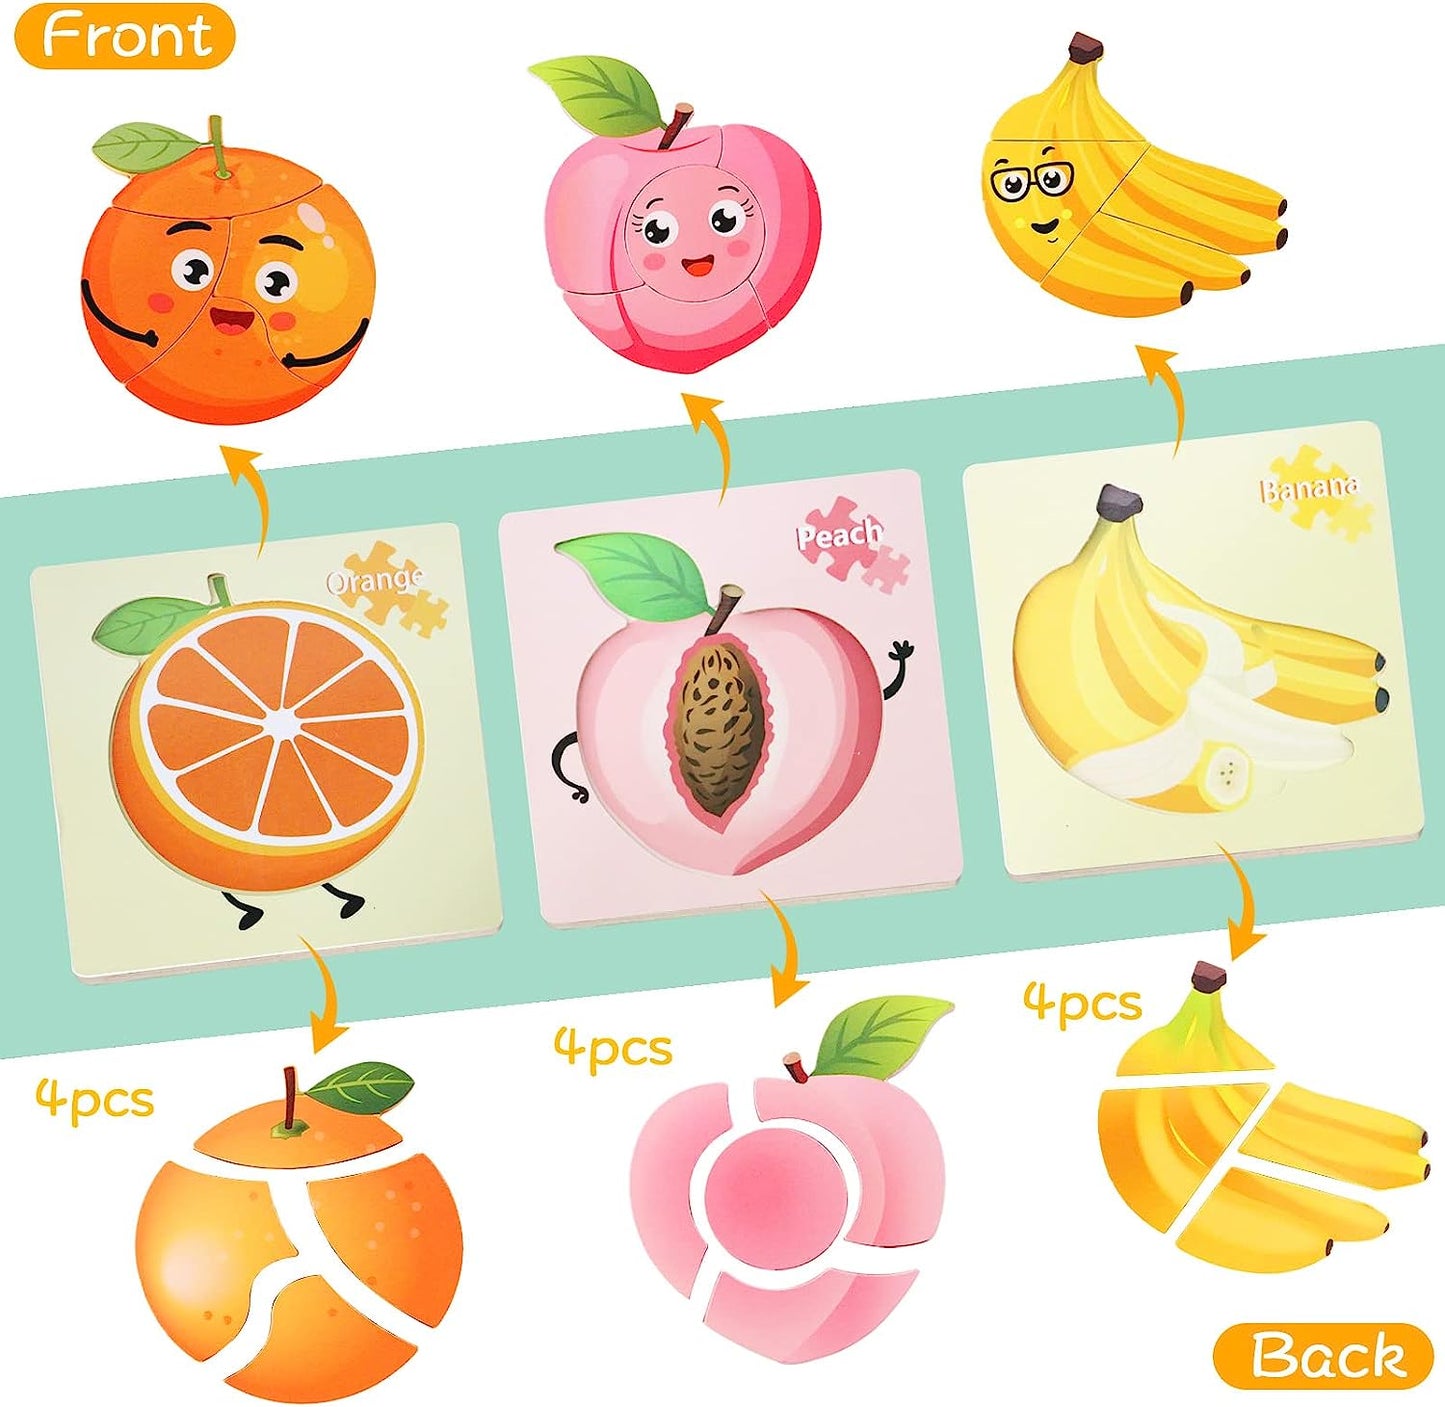 Full Display Wooden Toddler Fruit Jigsaw Puzzles Sensory Toys for 1 2 3 4 Year Old Boy Girl Preschool Learning Resources Activities Educational Fun Game Baby Toys Chris as Birthday Gifts